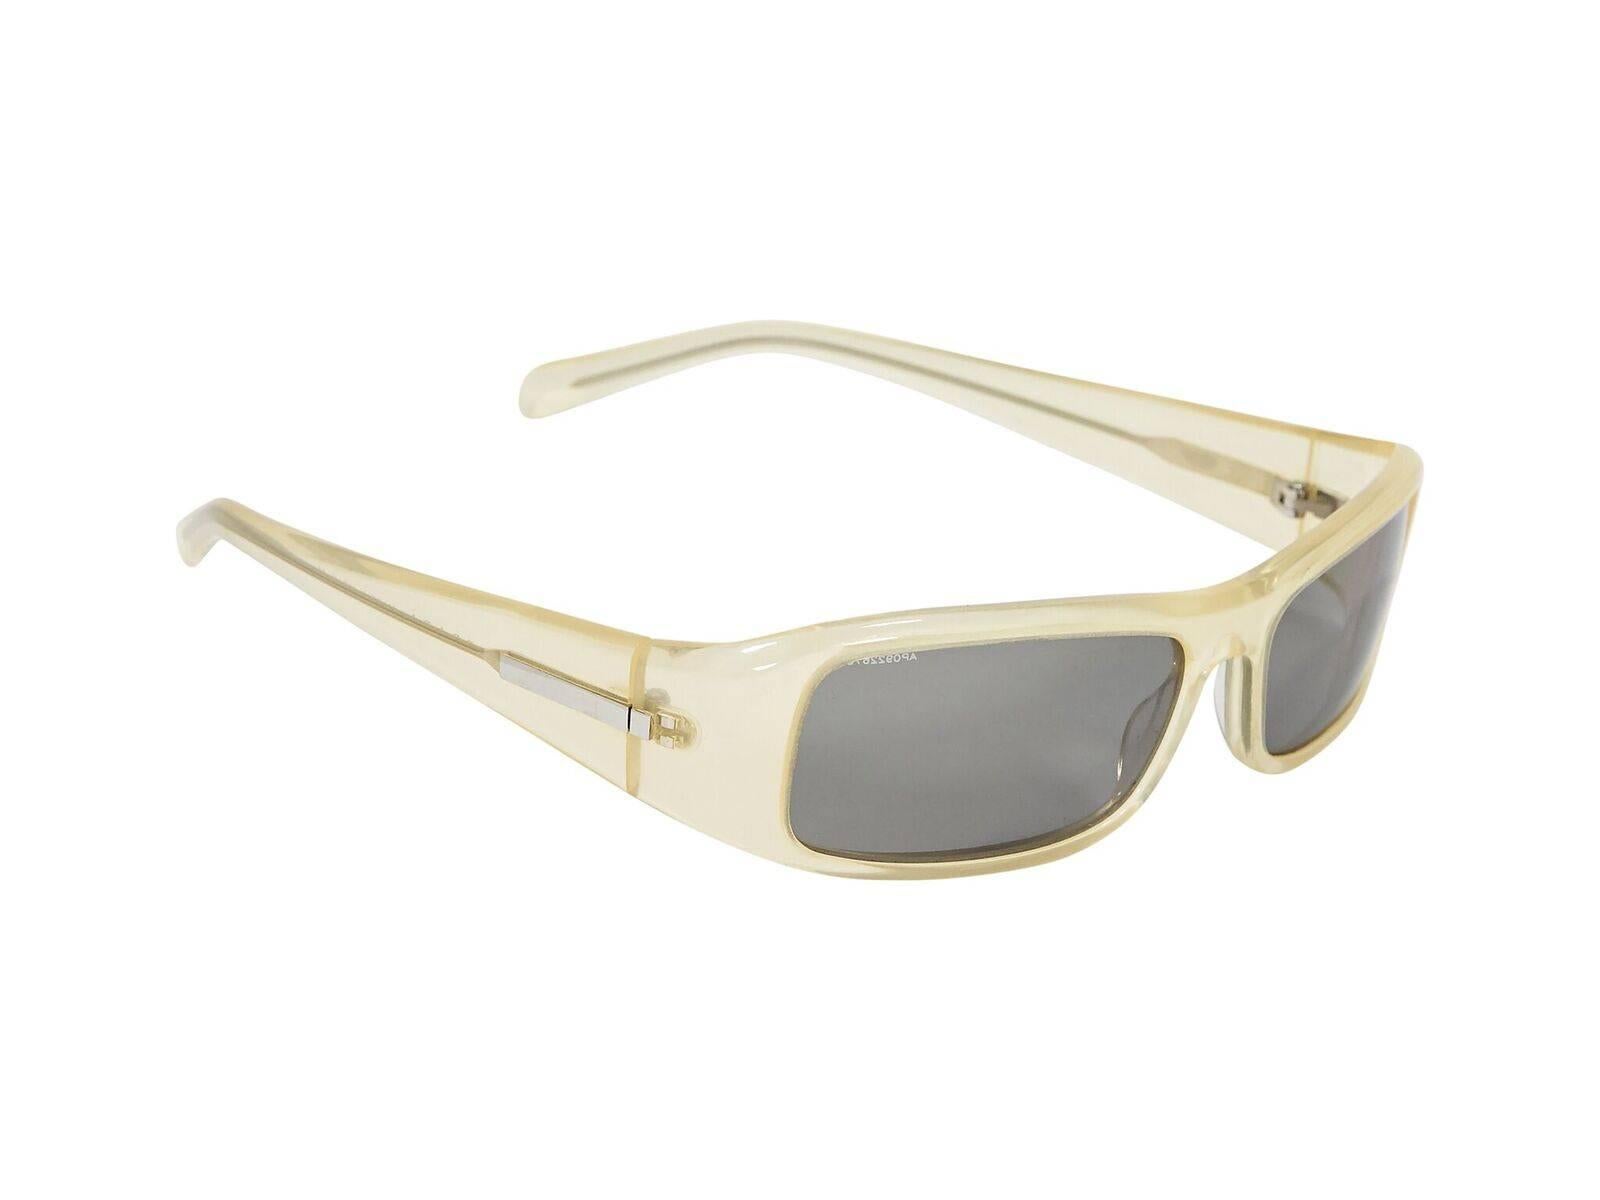 Product details:  Clear rectangular small sunglasses by Prada.  Silvertone hardware.  1.5